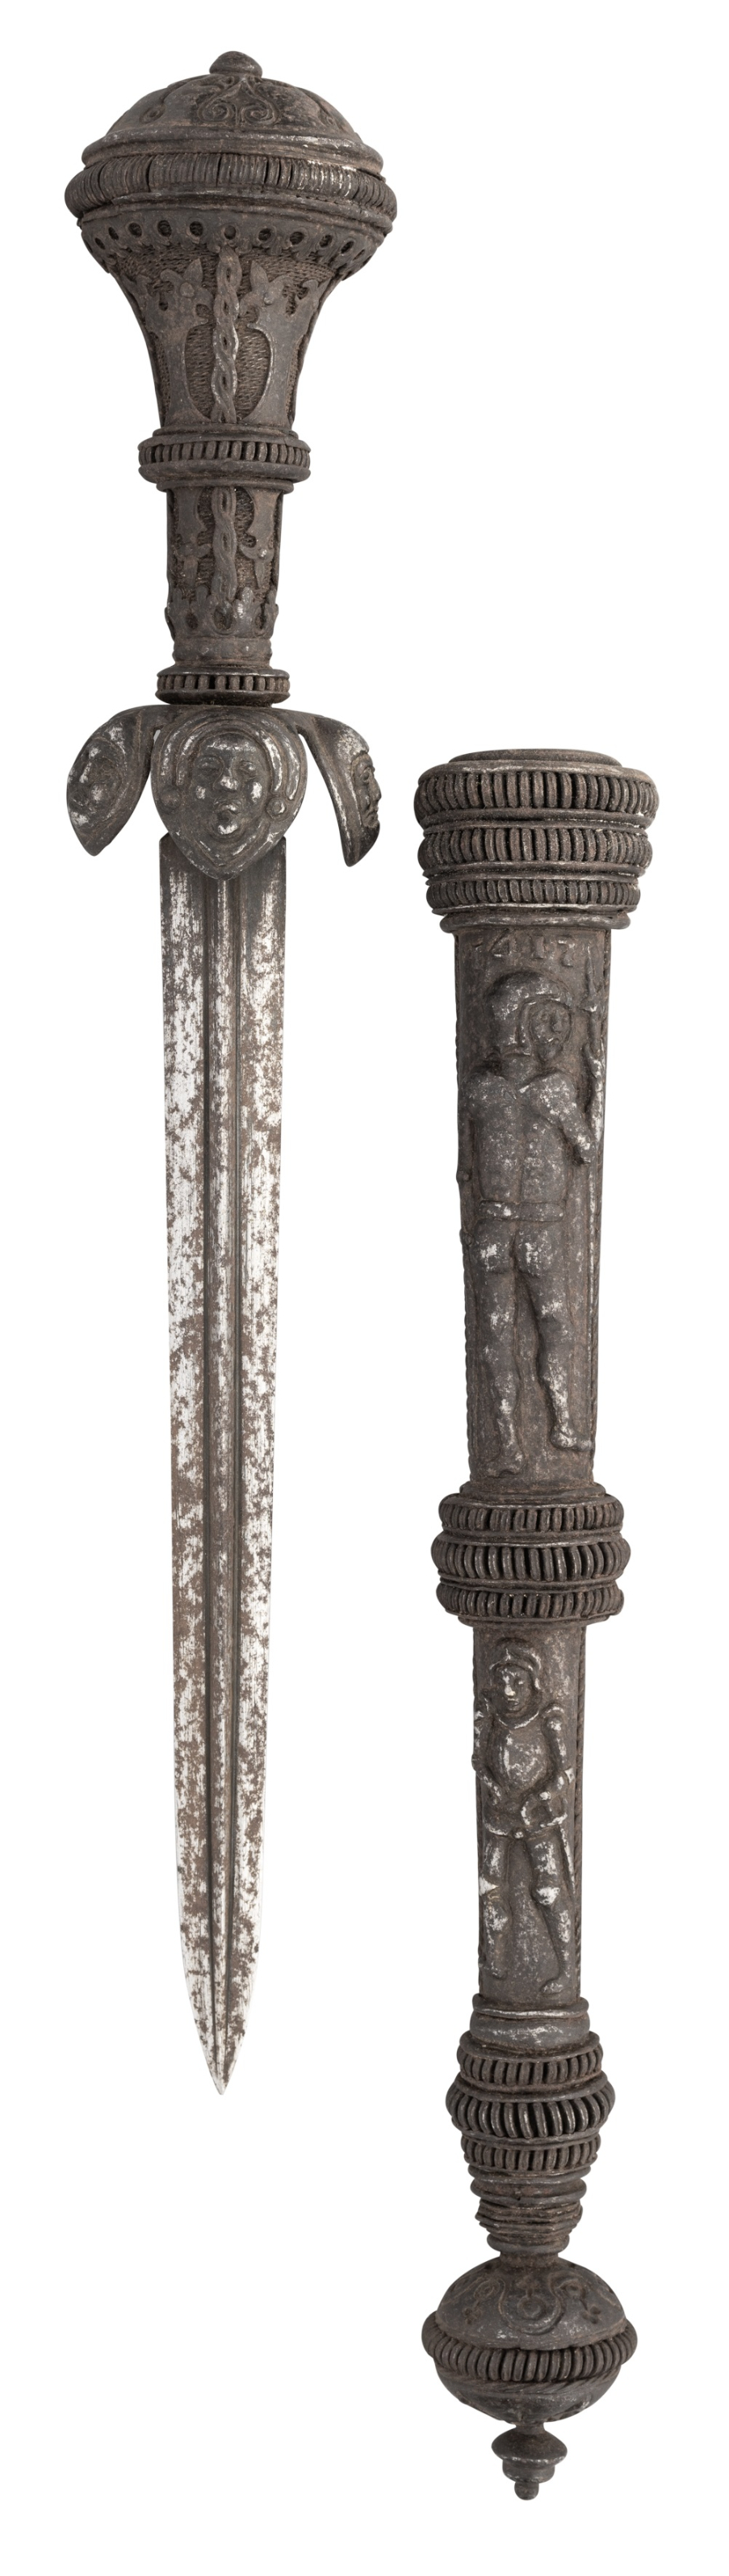 ‡ A DAGGER IN GERMAN MID-16TH CENTURY 'LANDSKNECHT' STYLE, LATE 19TH/EARLY 20TH CENTURY